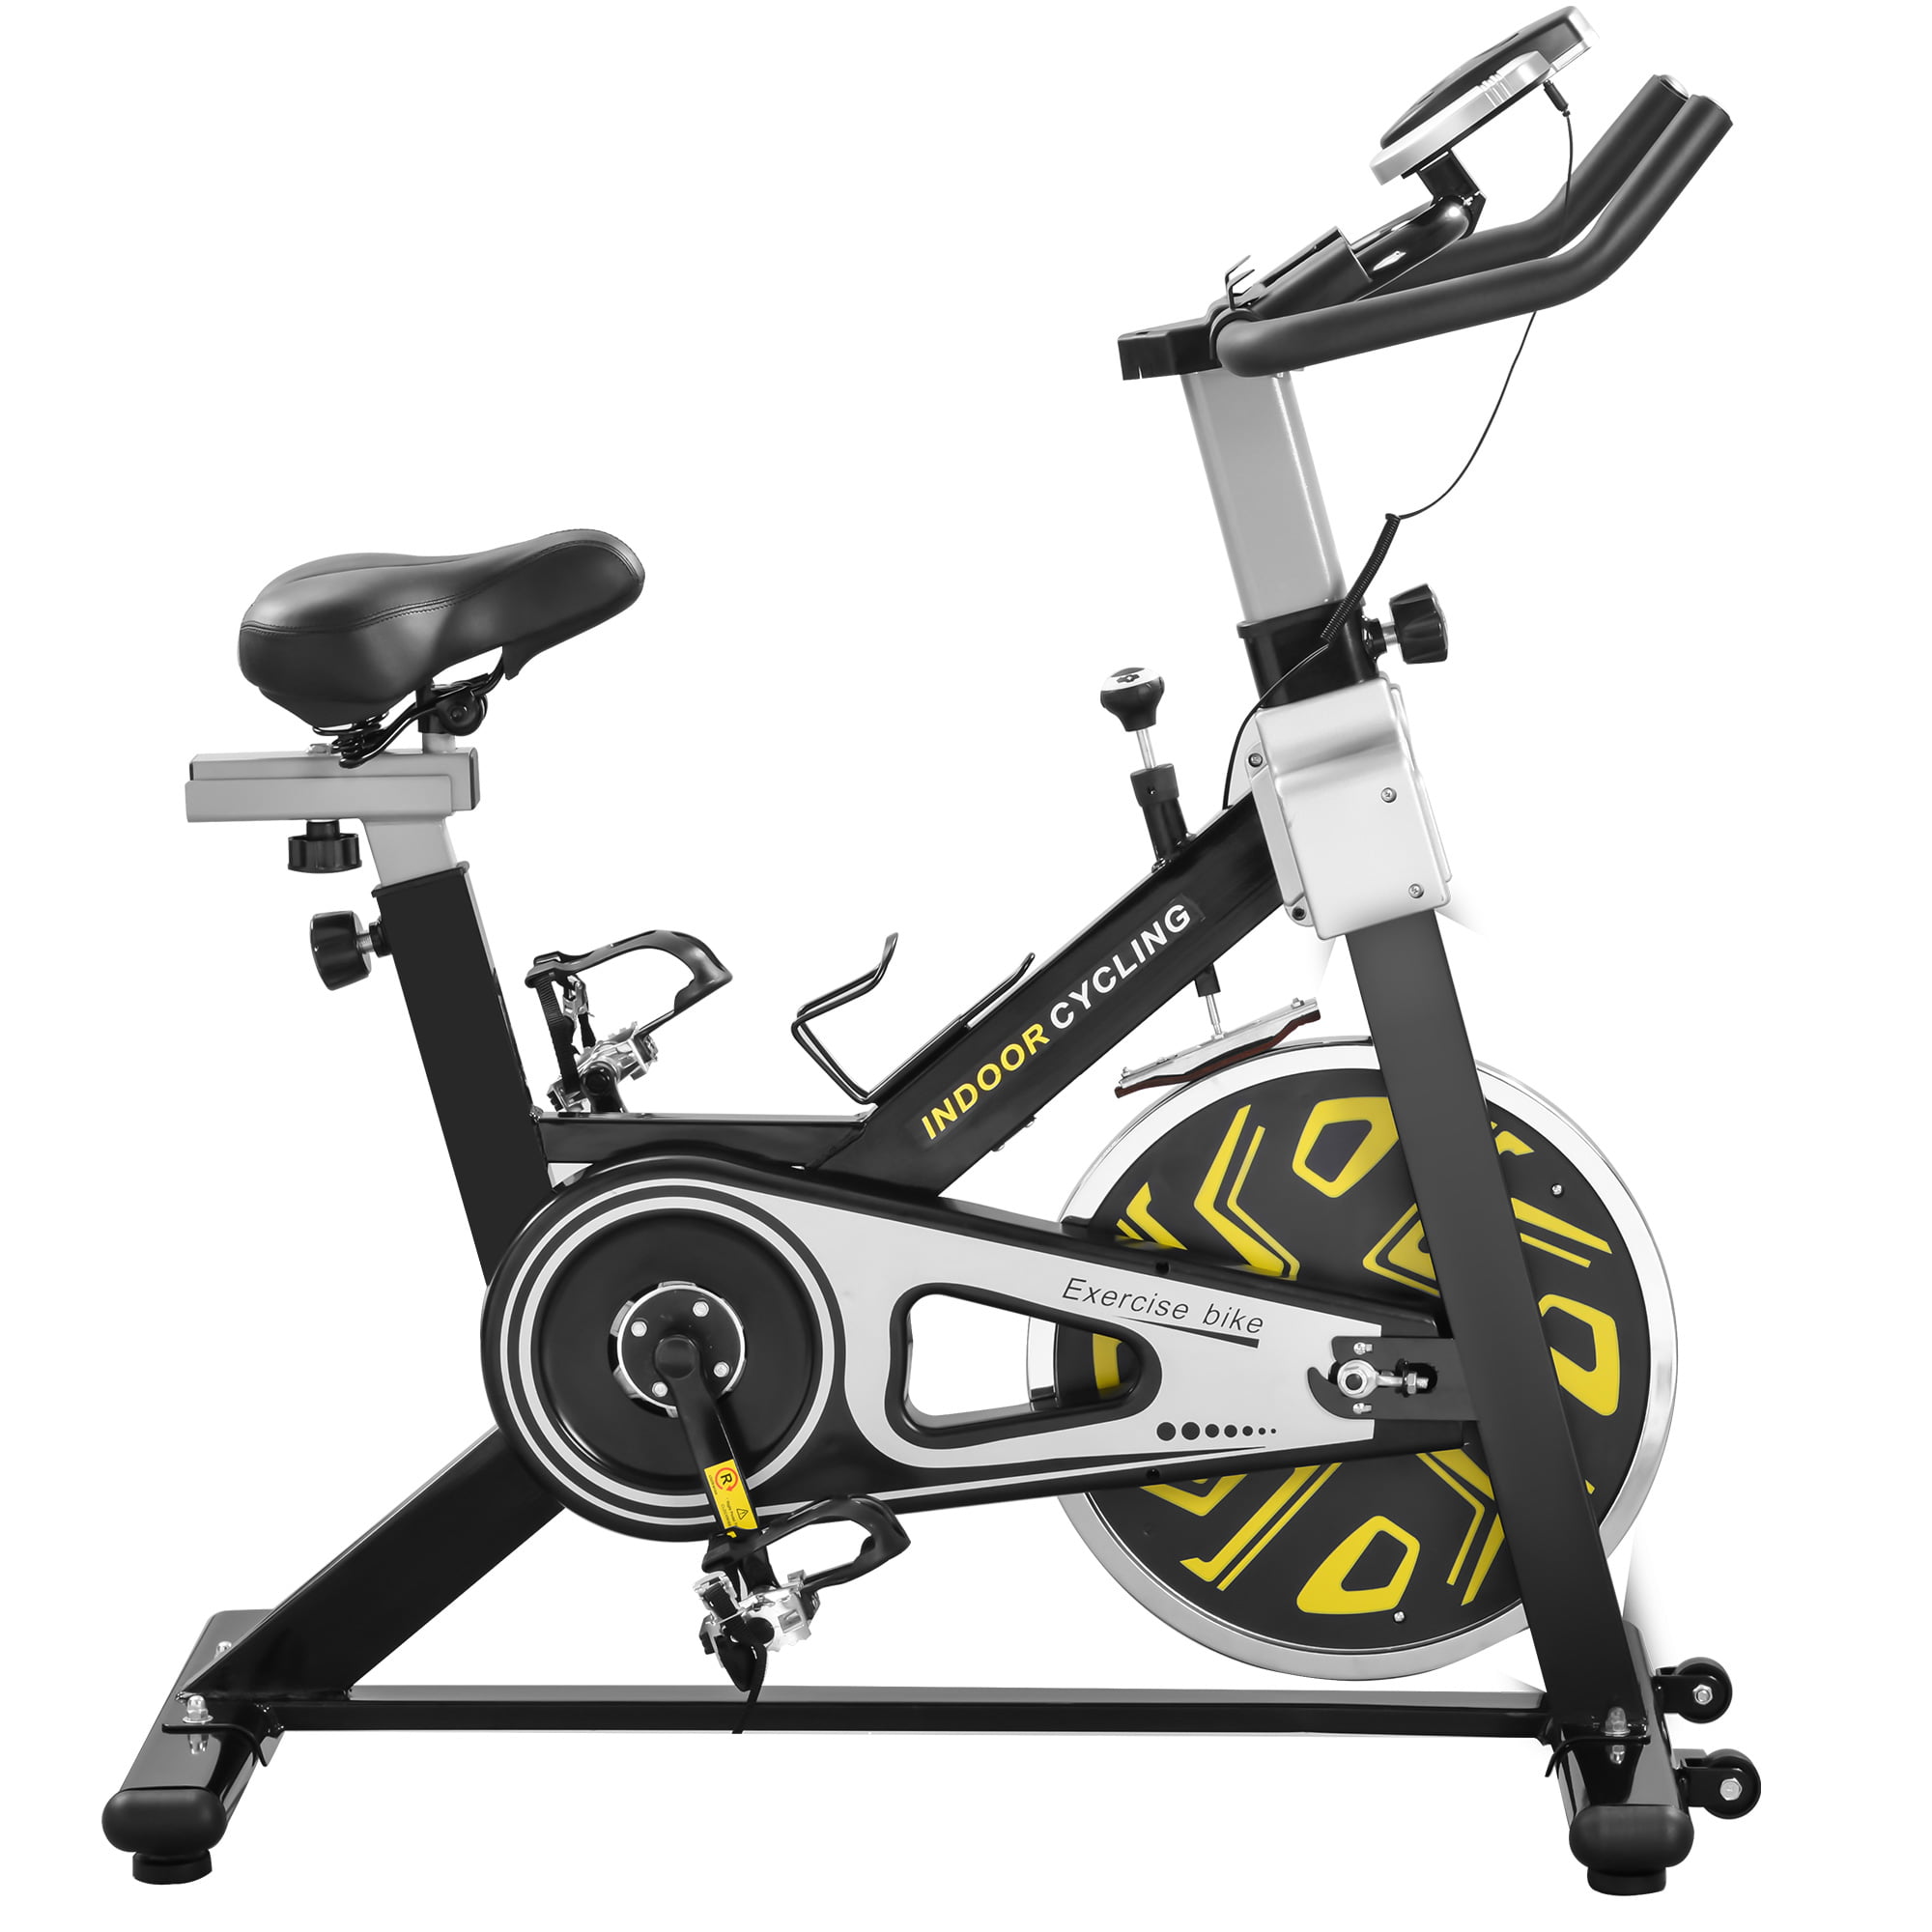 Details about   Indoor Exercise Bike Cycling Stationary Bike Fitness Gym Bike Cardio Workout New 